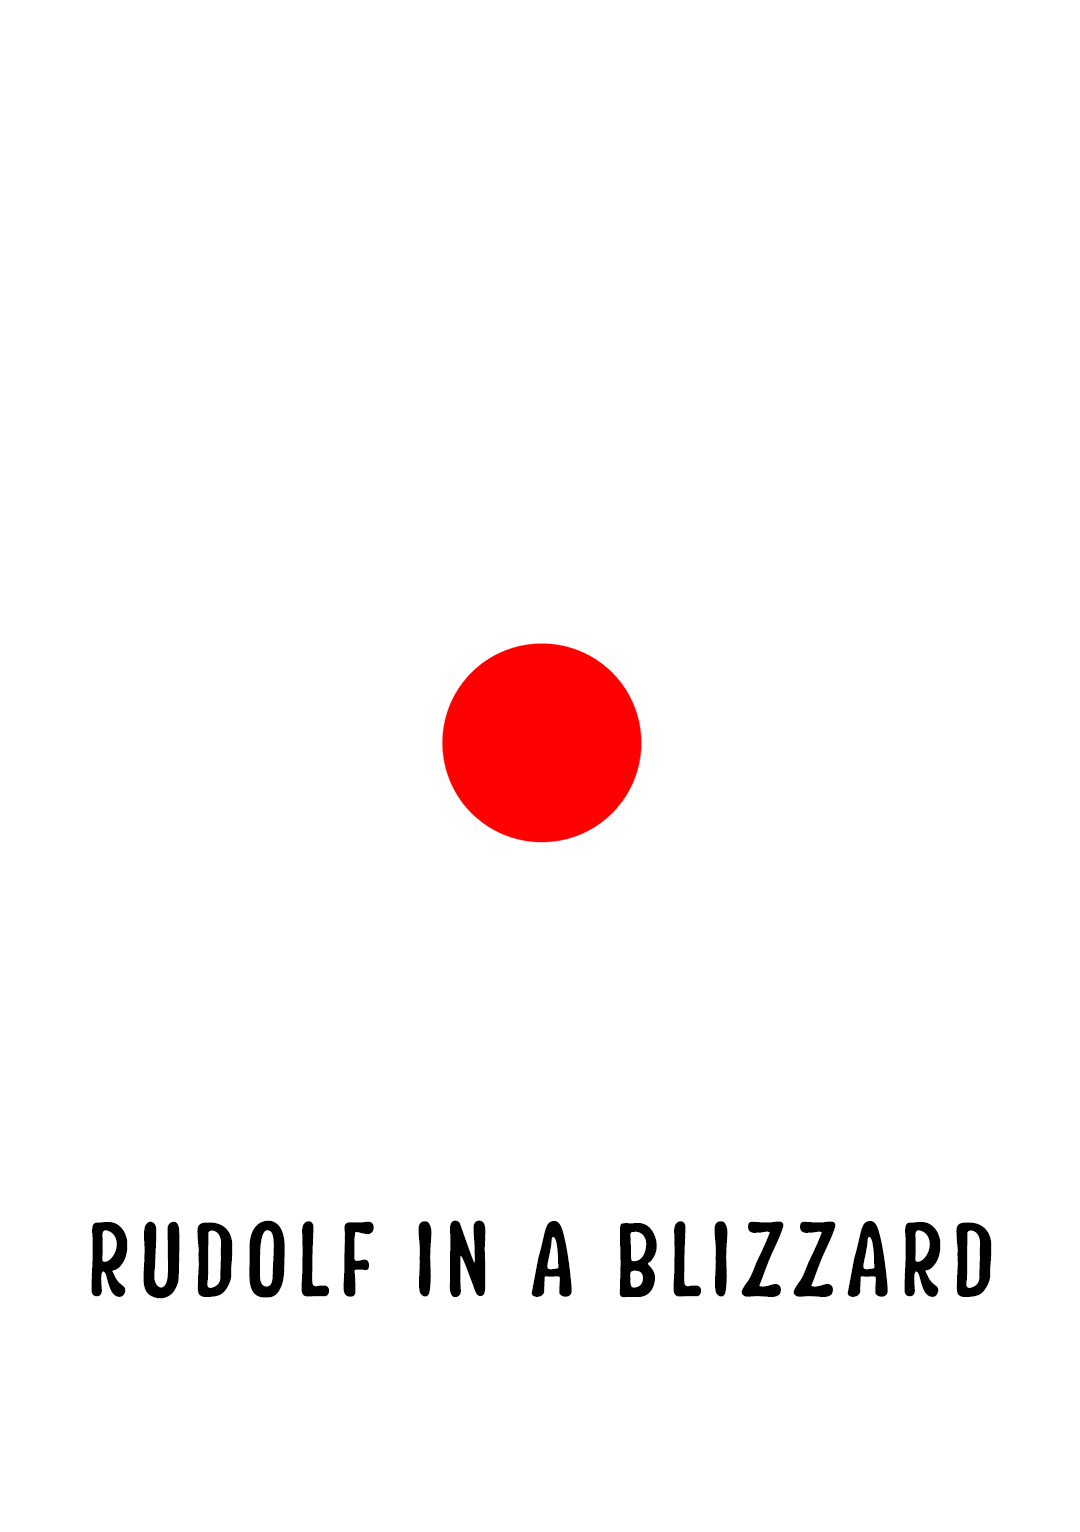 rudolf in a blizzard funny christmas card